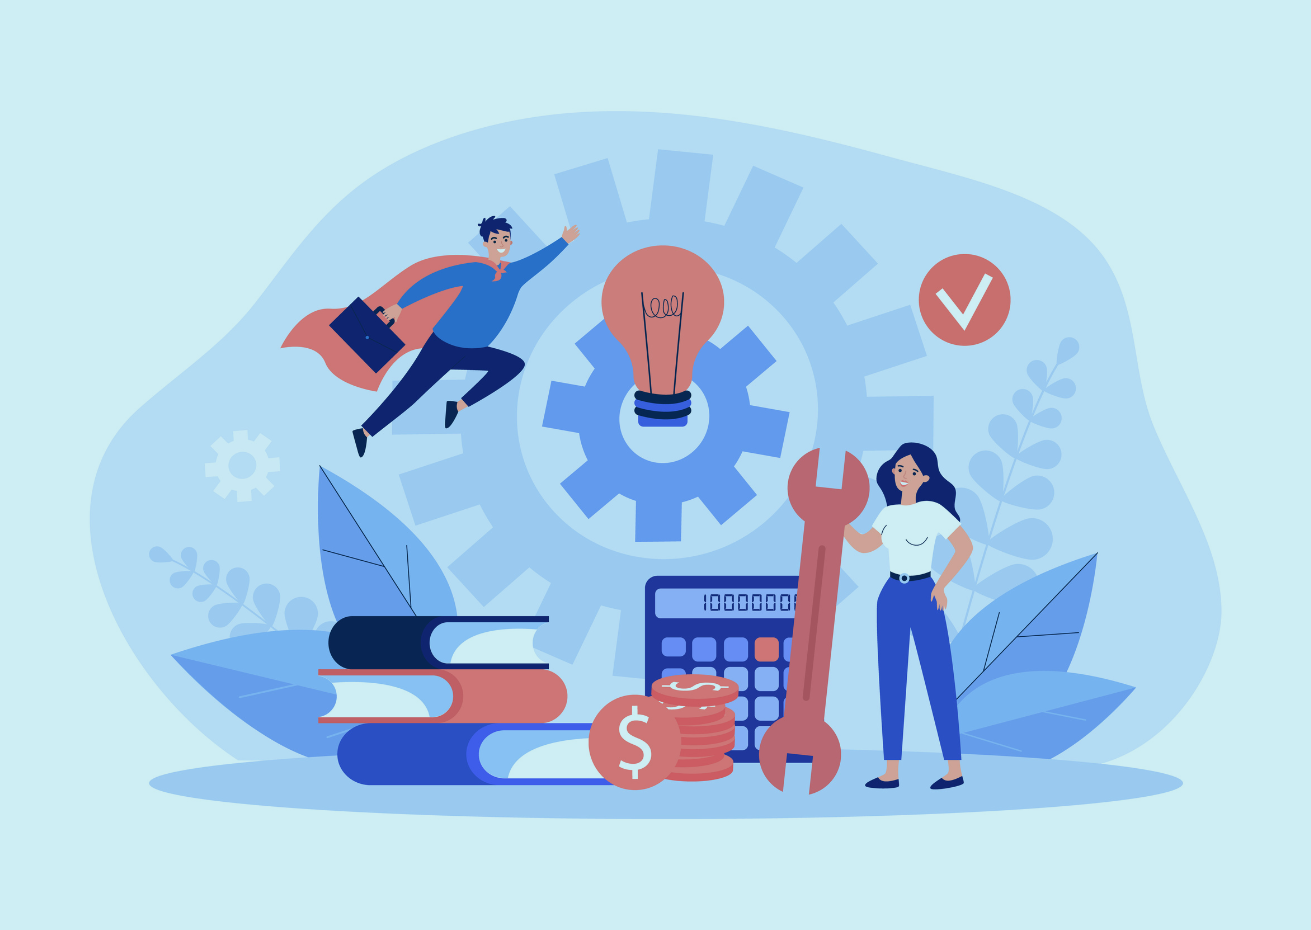 Image of an illustration of a woman holding an oversized spanner and a man flying in a cape with a brief case with cogs, books, a lightbulb and a calculator with coins in the background for Rentsure About Us.